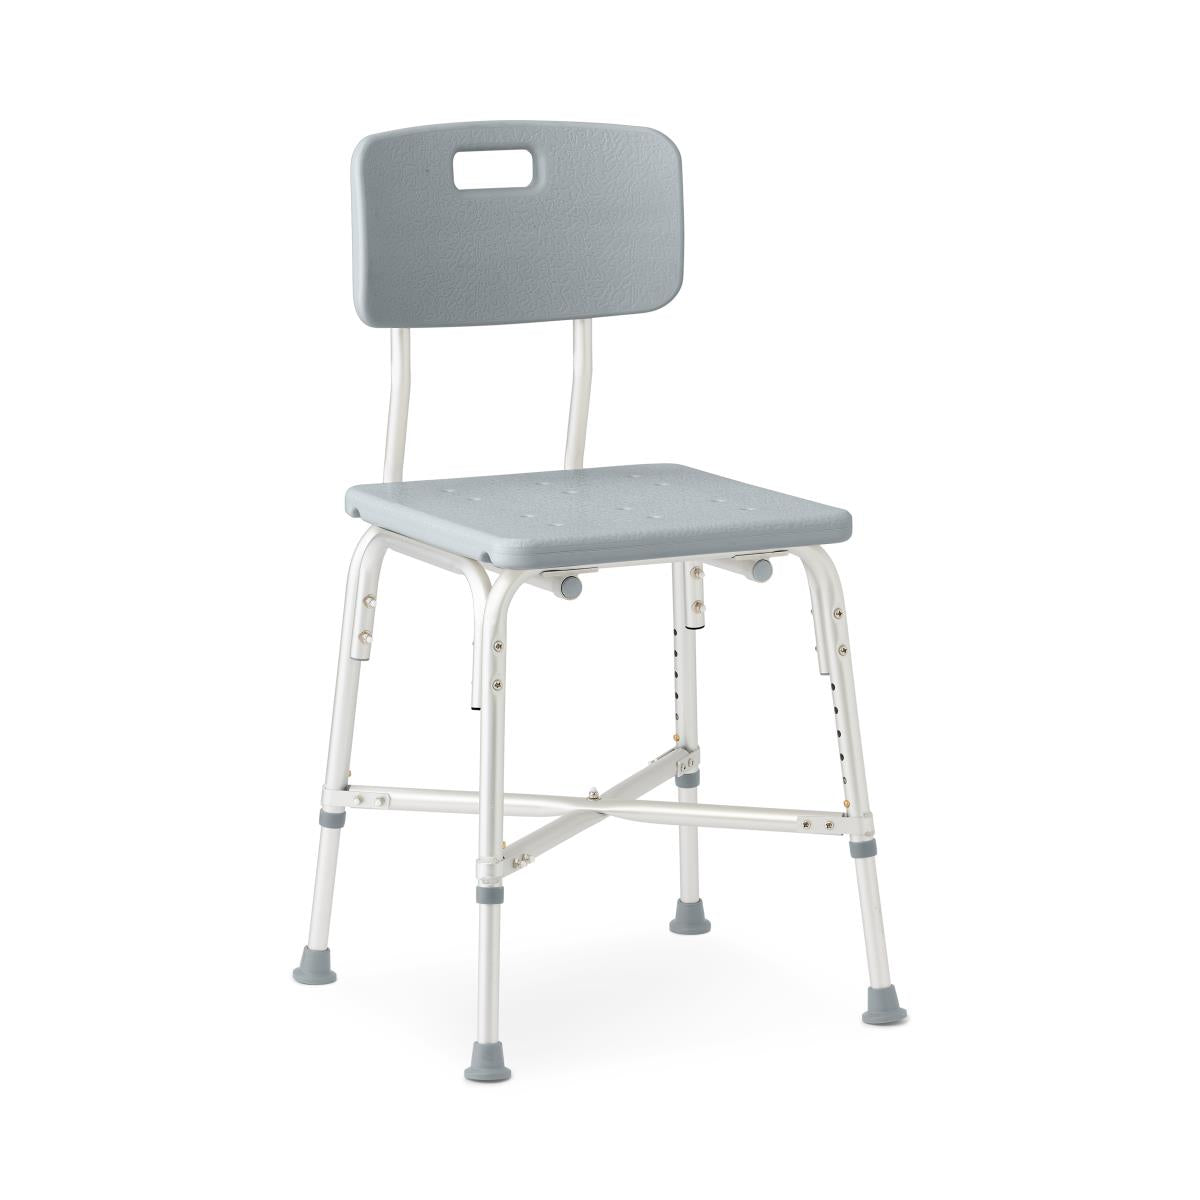 Medline Bariatric Shower Chair with Back 650lb Cap. G2-100BAX1